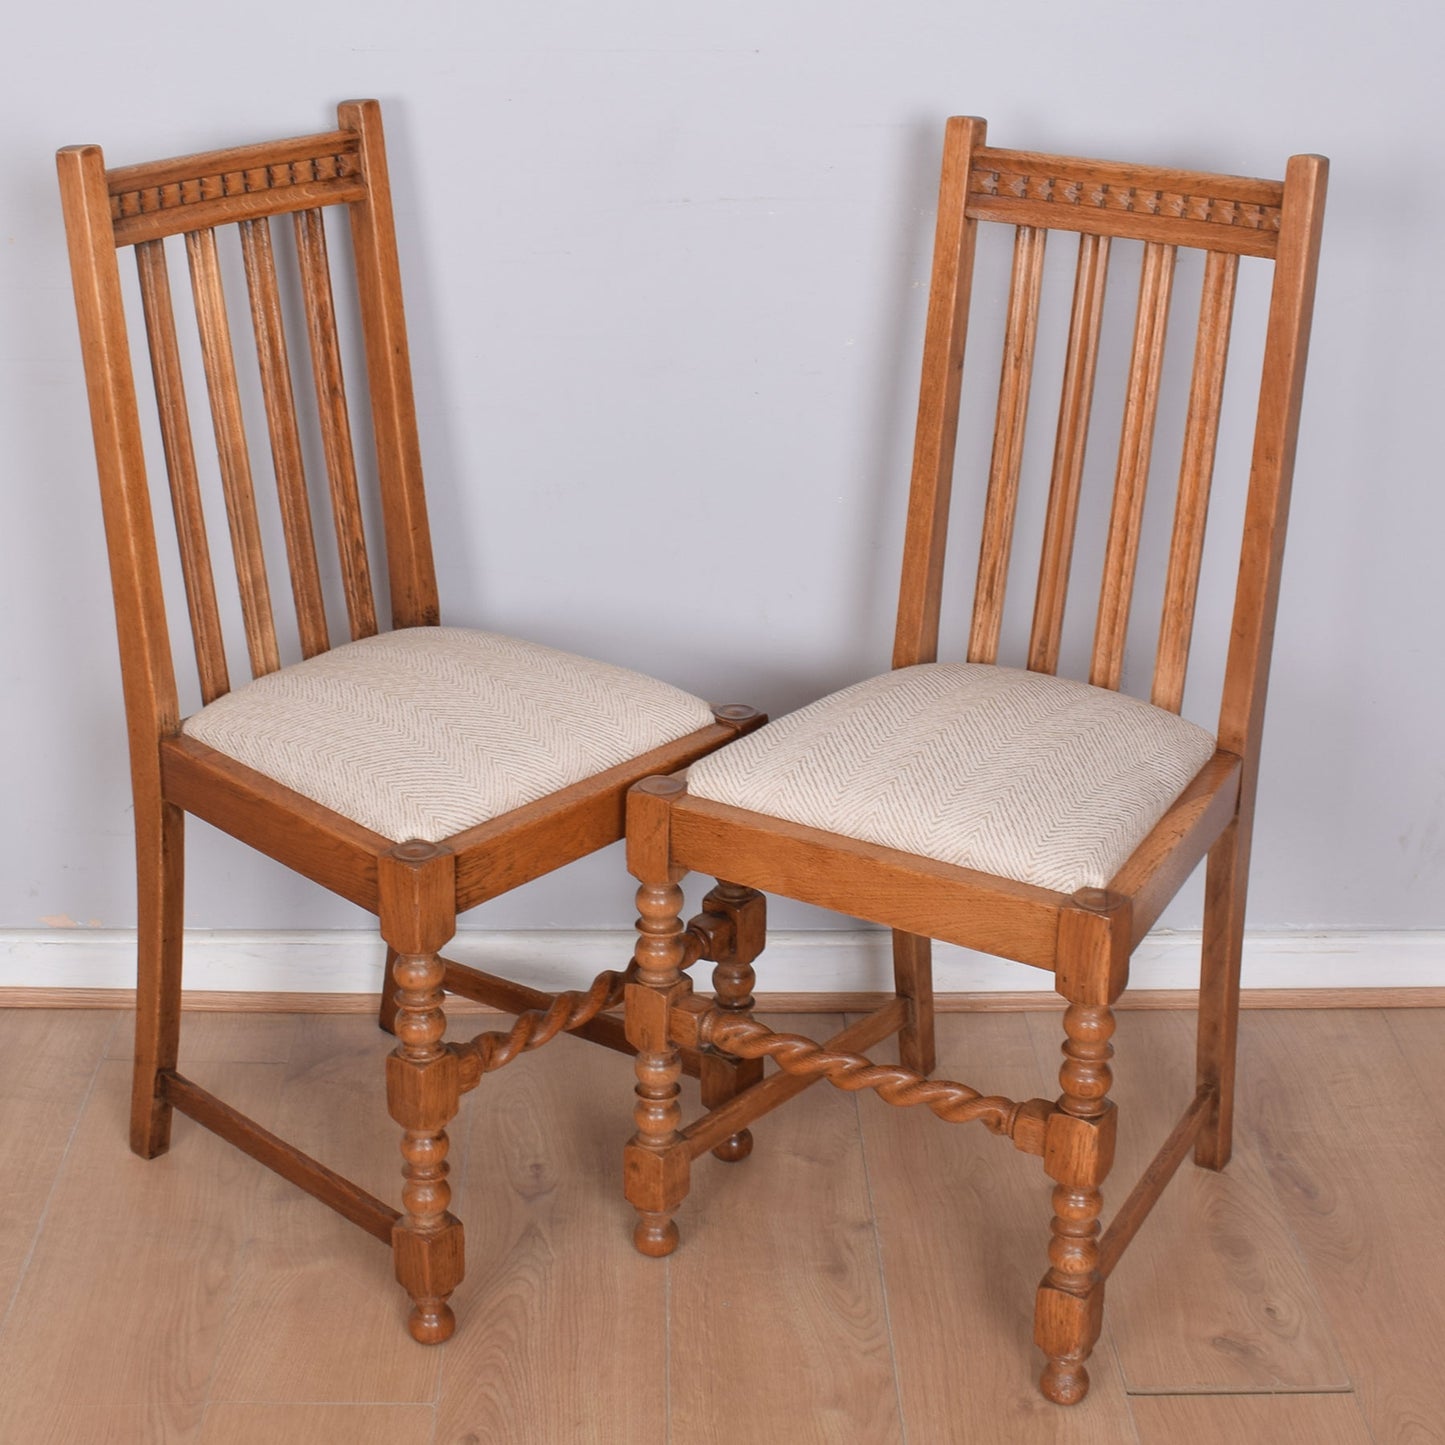 Draw-Leaf Dining Table with Four Chairs